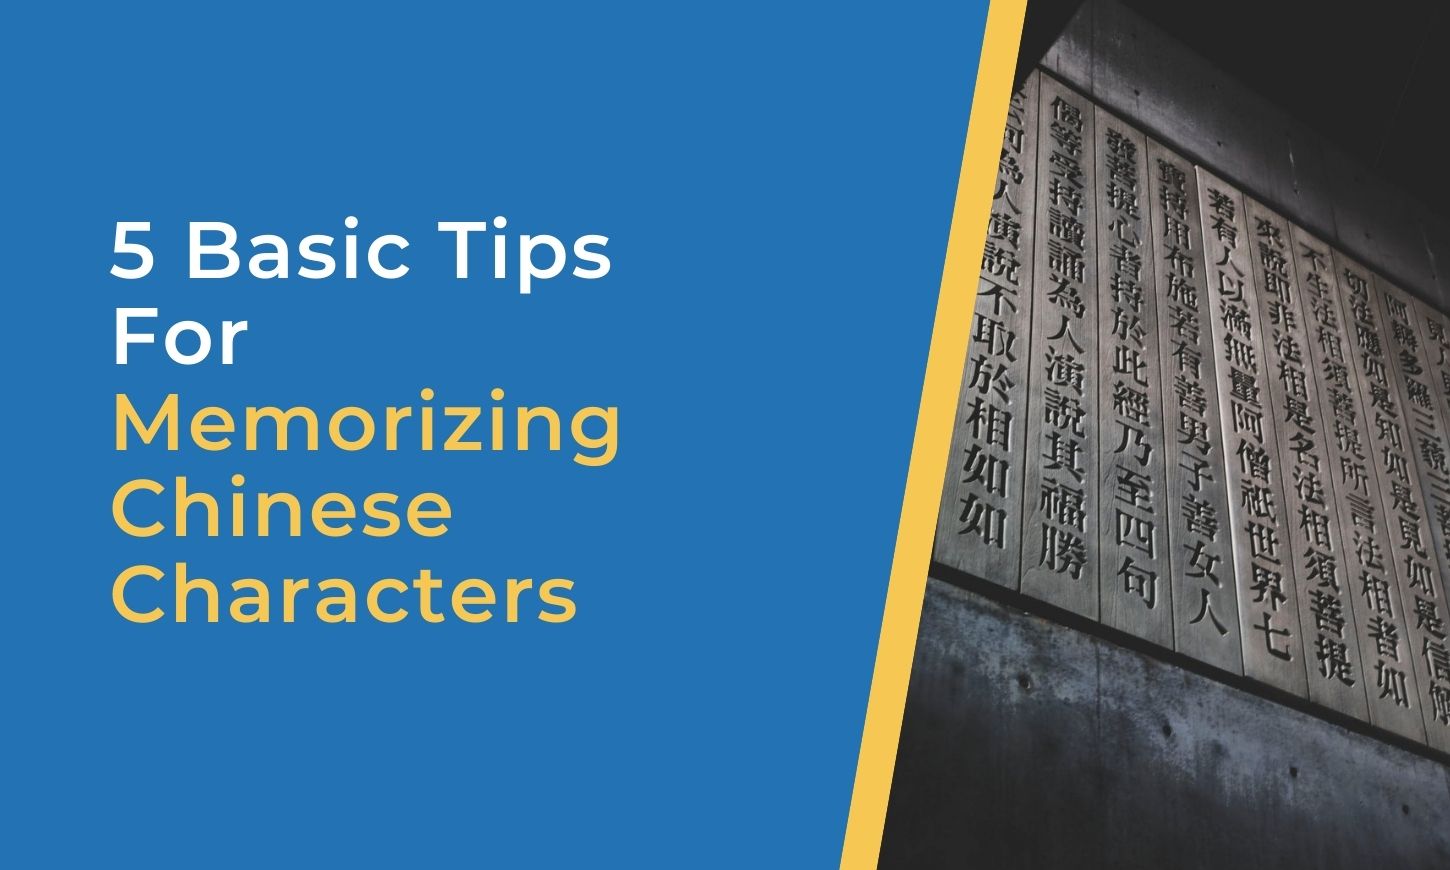 5 Basic Tips For Memorizing Chinese Characters